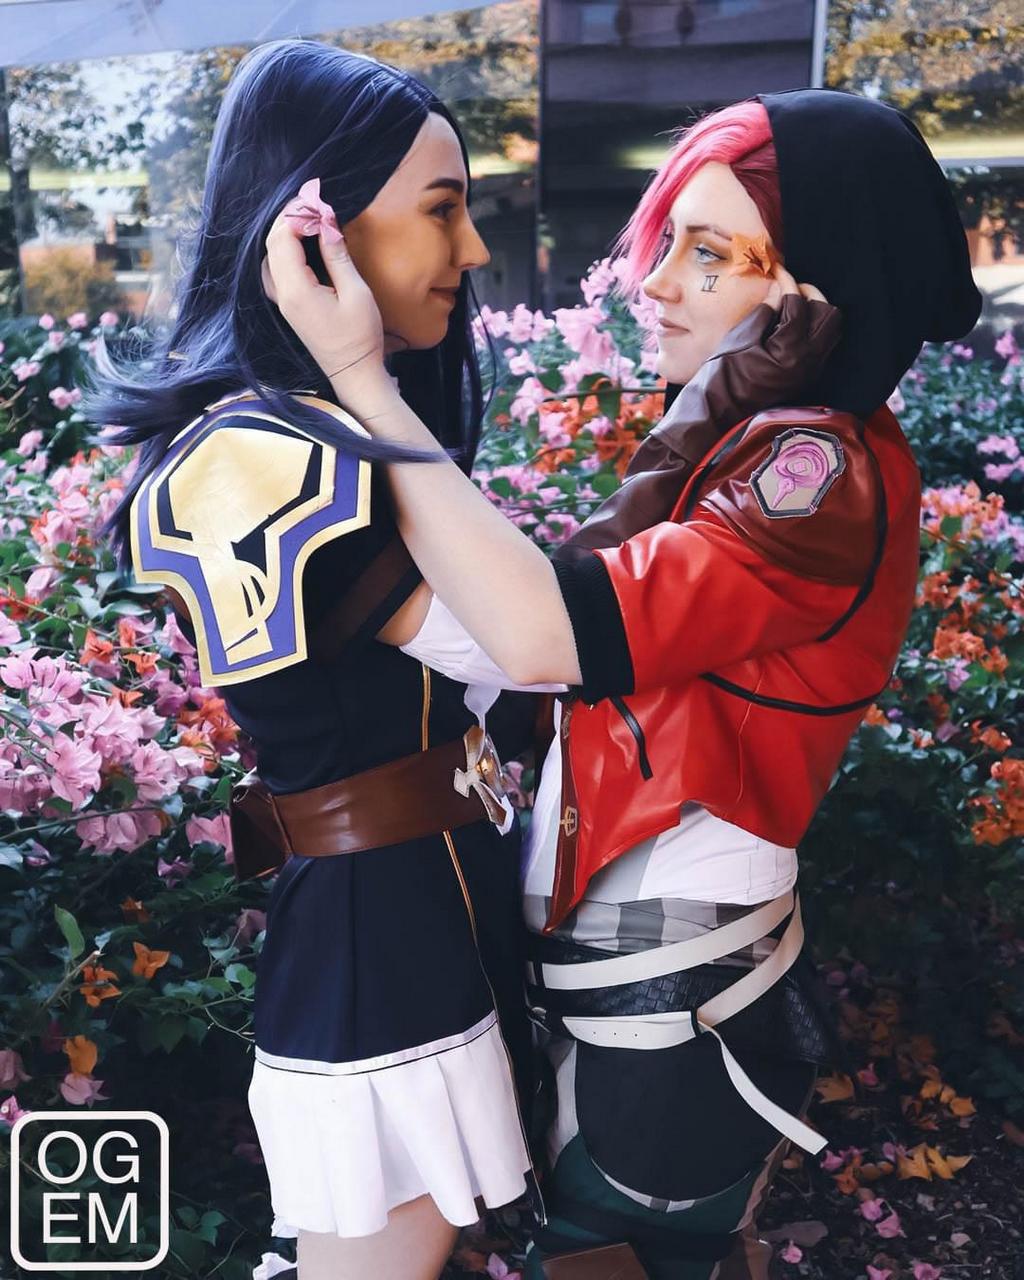 Self Cait And Vi Being Cute 1greenemerald As Caitlyn Kitsu Ttv As V